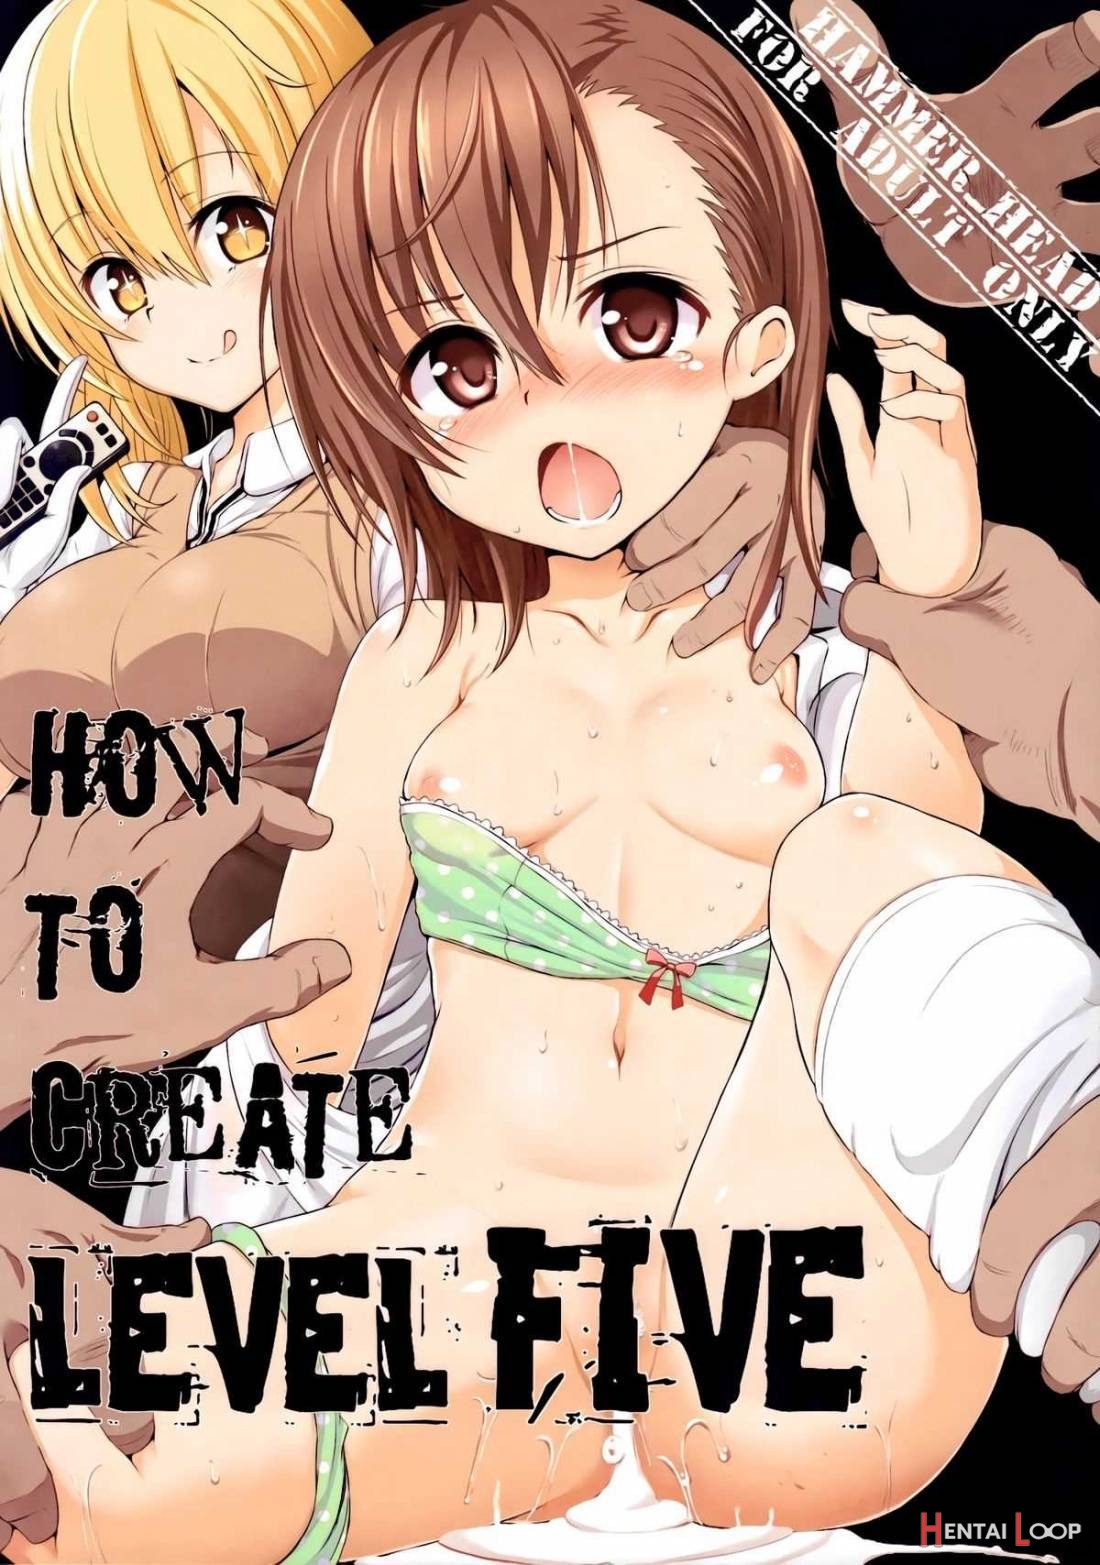 HOW TO CREATE LEVEL FIVE page 1